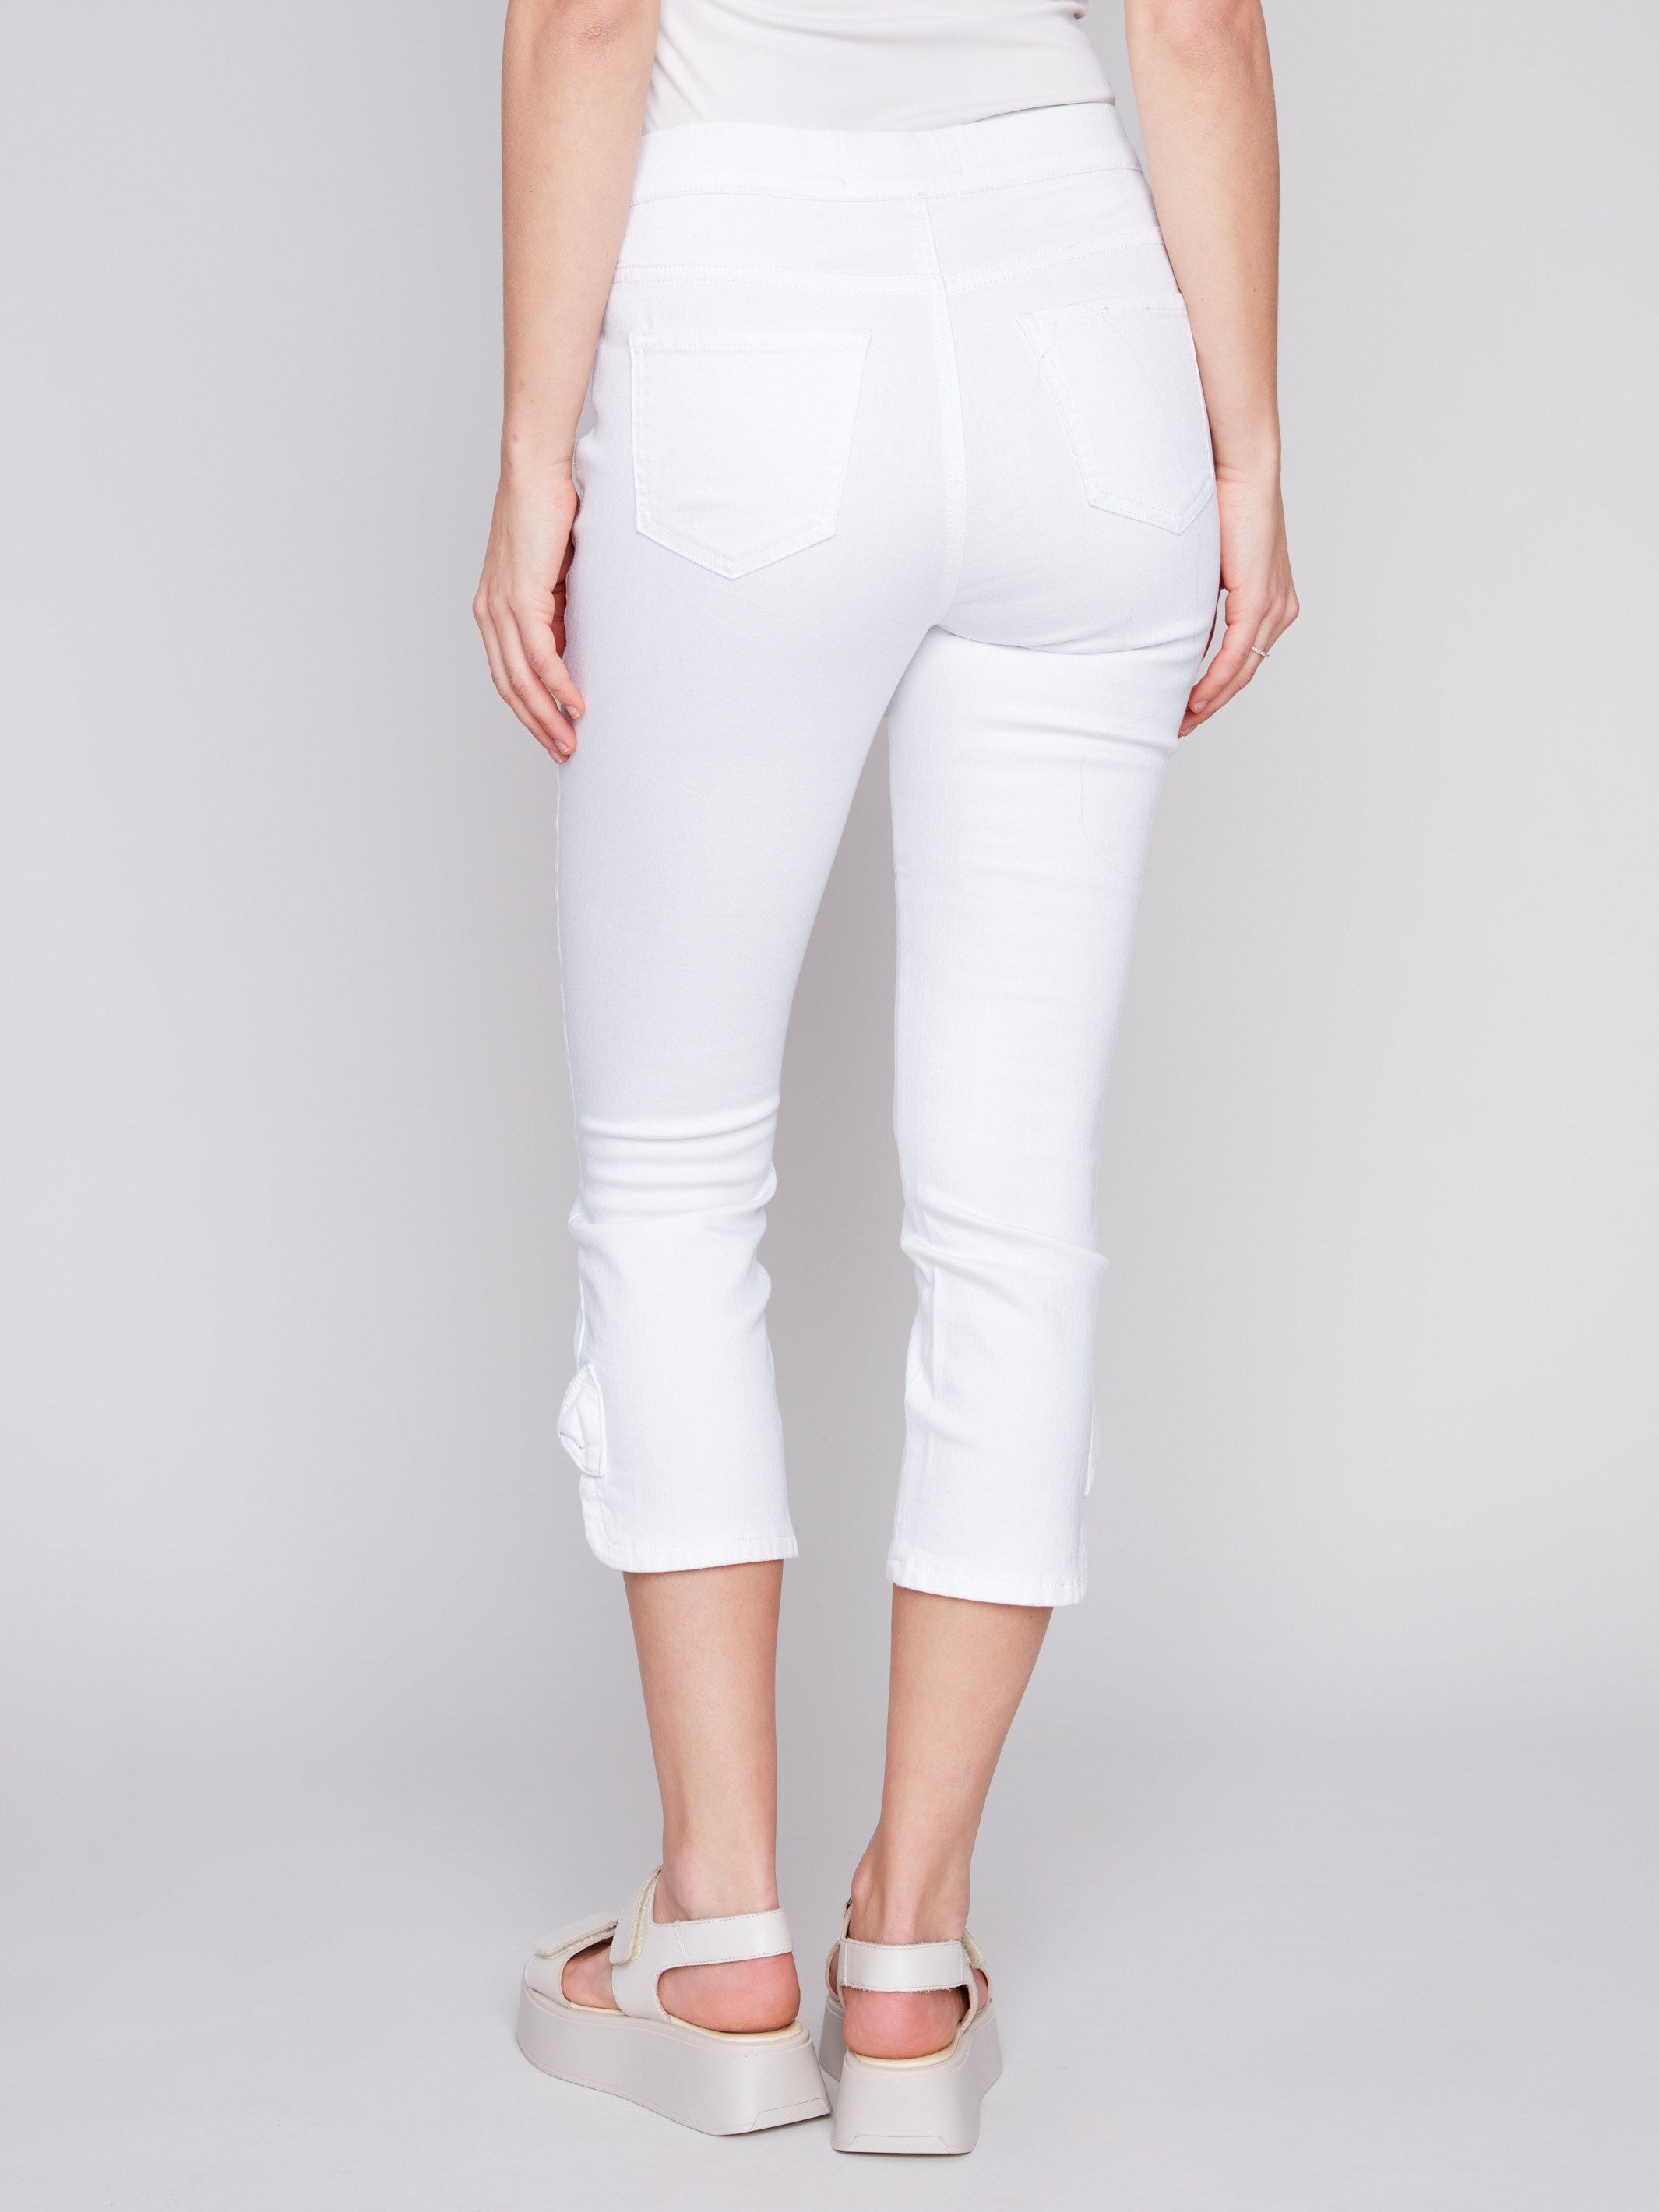 Pull-On Jeans with Bow Detail - White - Charlie B Collection Canada - Image 3